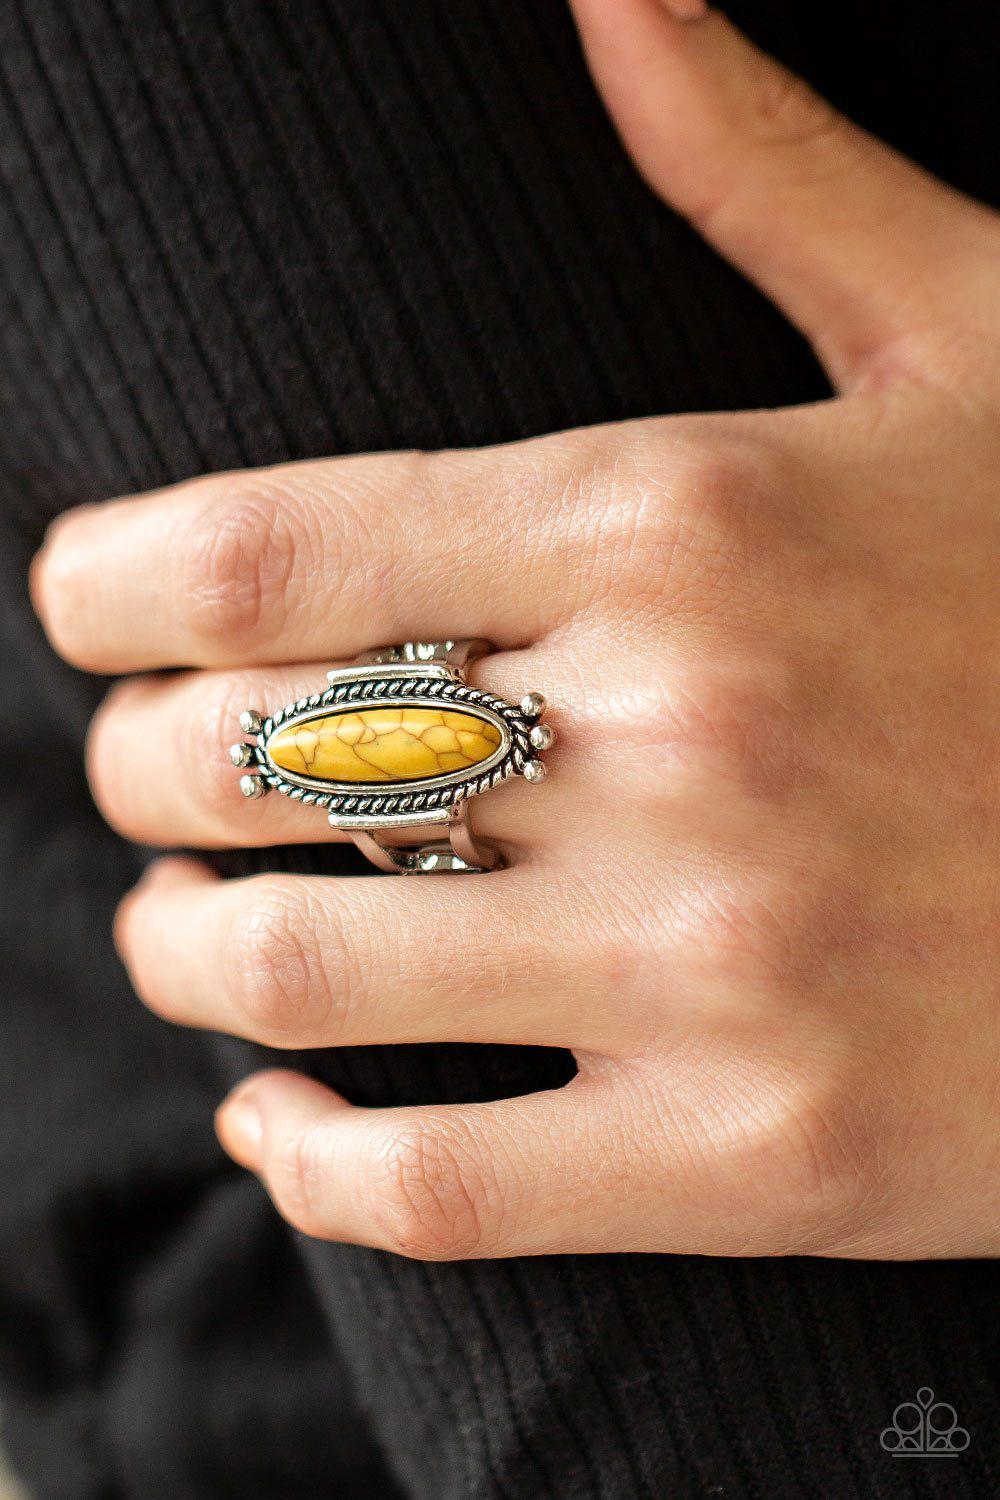 Sahara Escape Yellow Stone Ring - Paparazzi Accessories- lightbox - CarasShop.com - $5 Jewelry by Cara Jewels